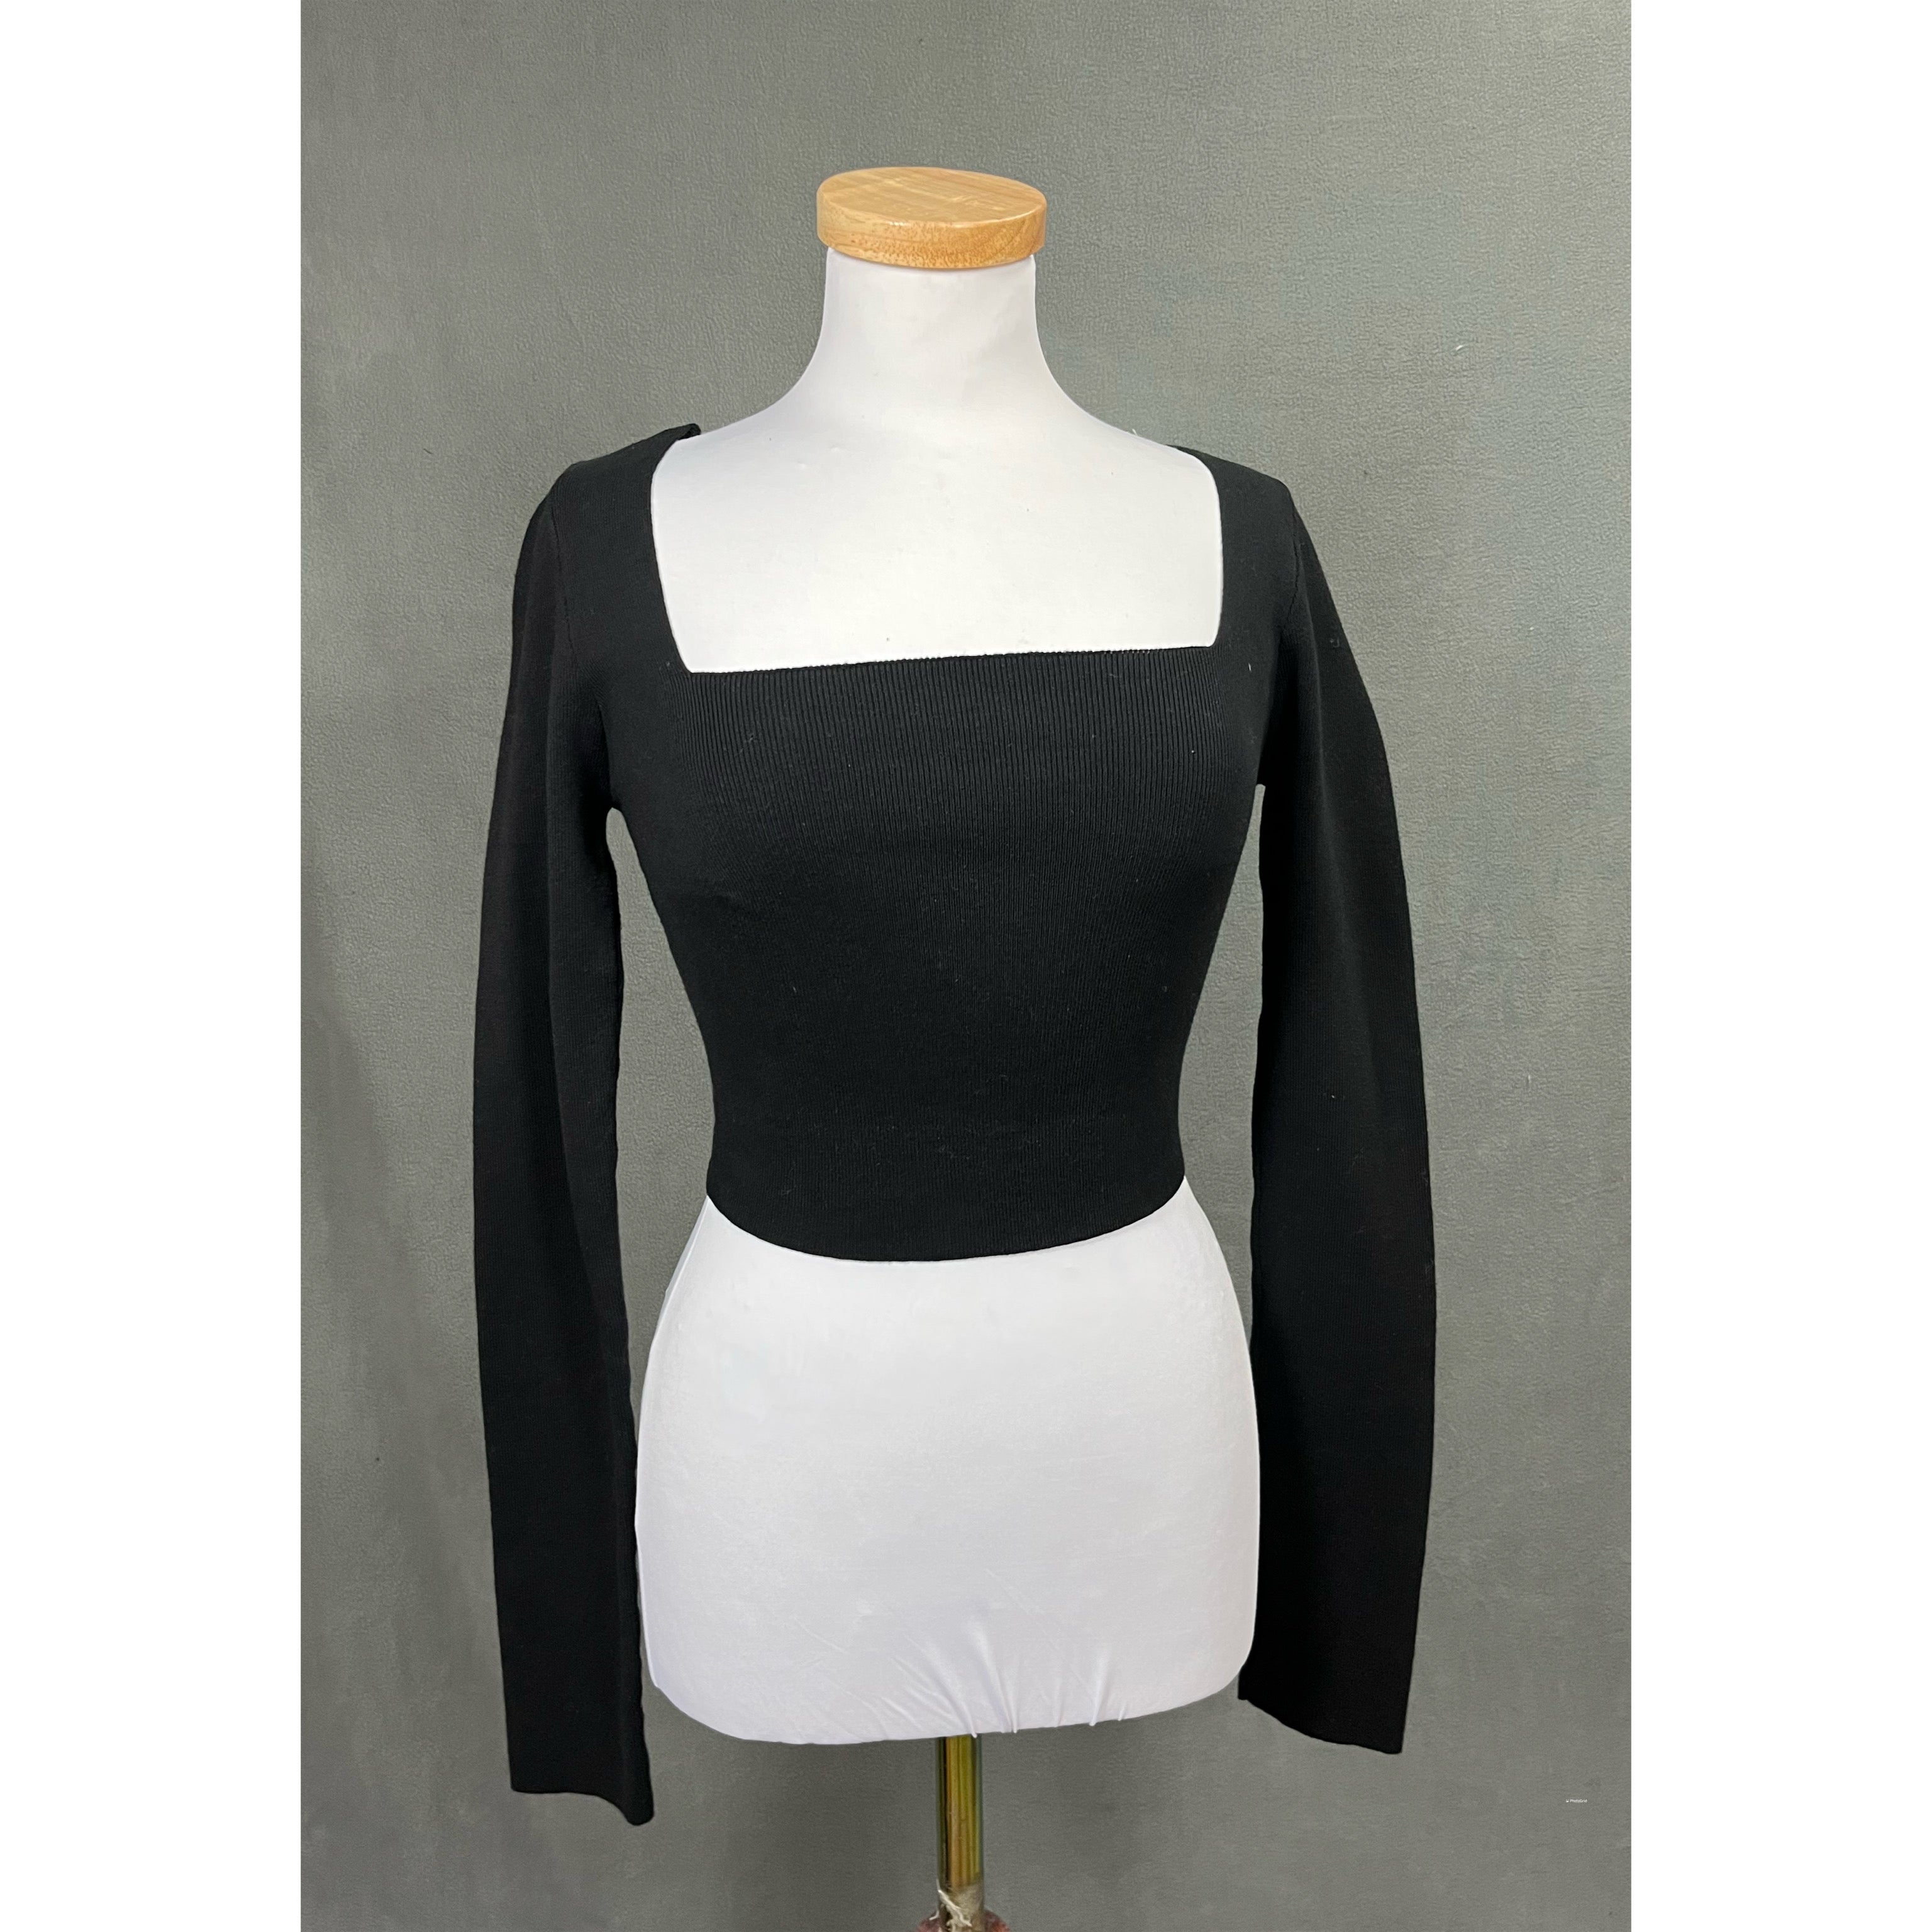 Le Lis black cropped sweater, size S, NEW WITH TAGS!